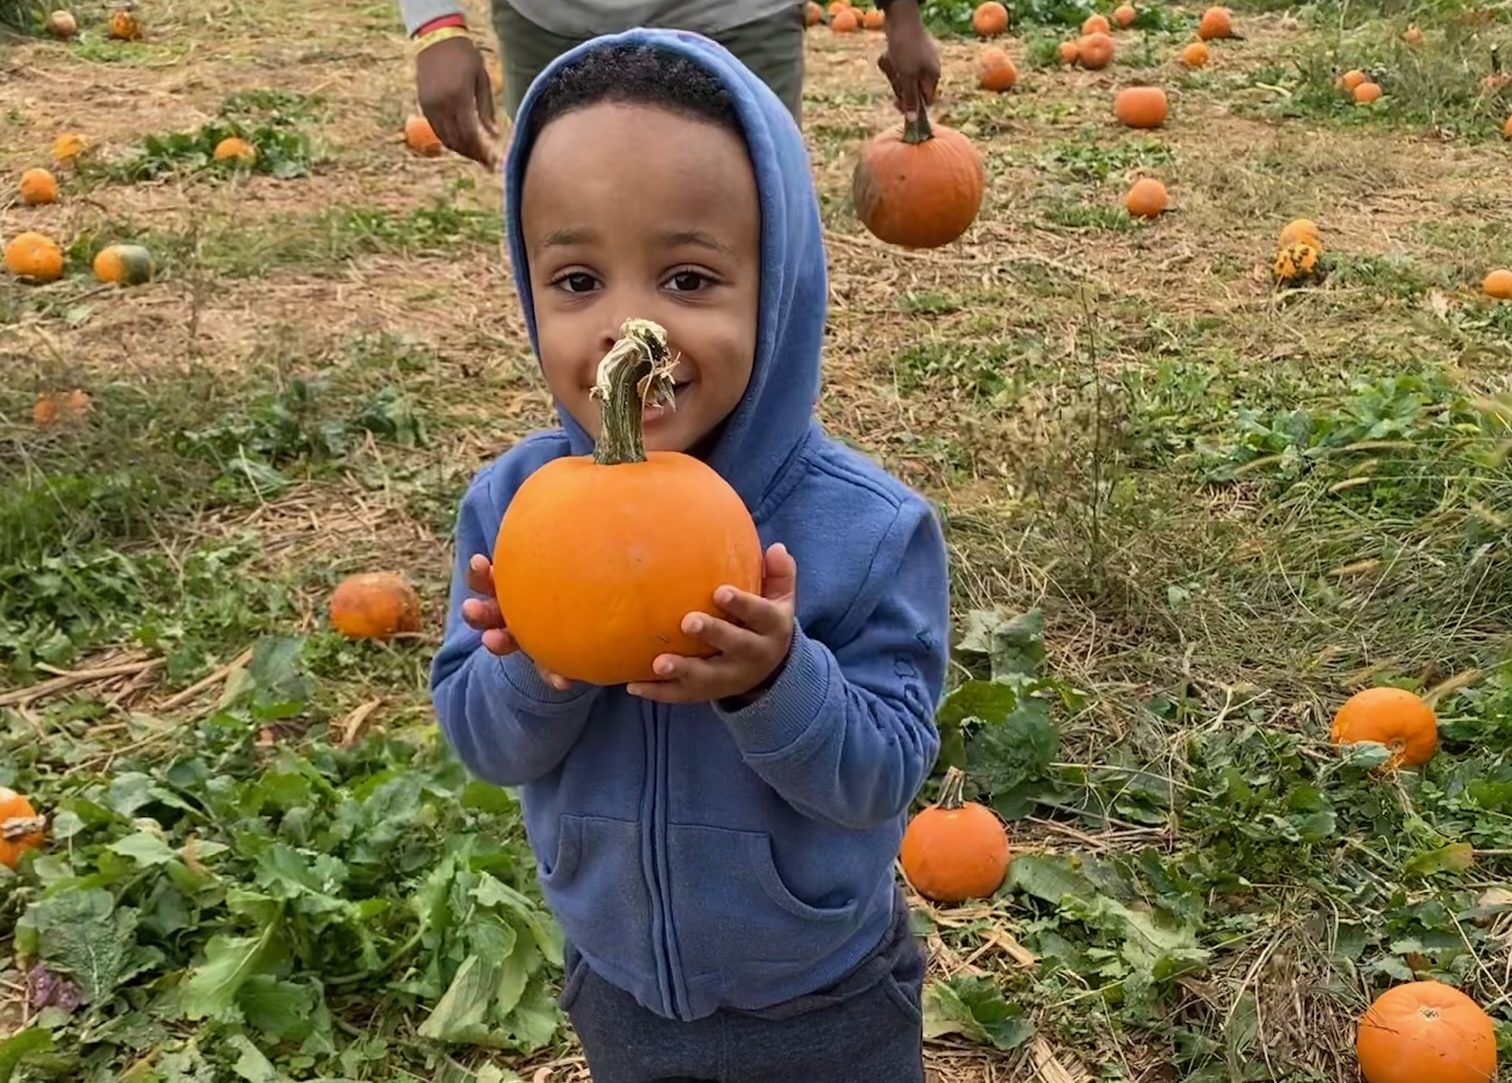 A three-year-old Little Dragons student shows off his pumpkin during a lesson in farm life at Gaver Farm.